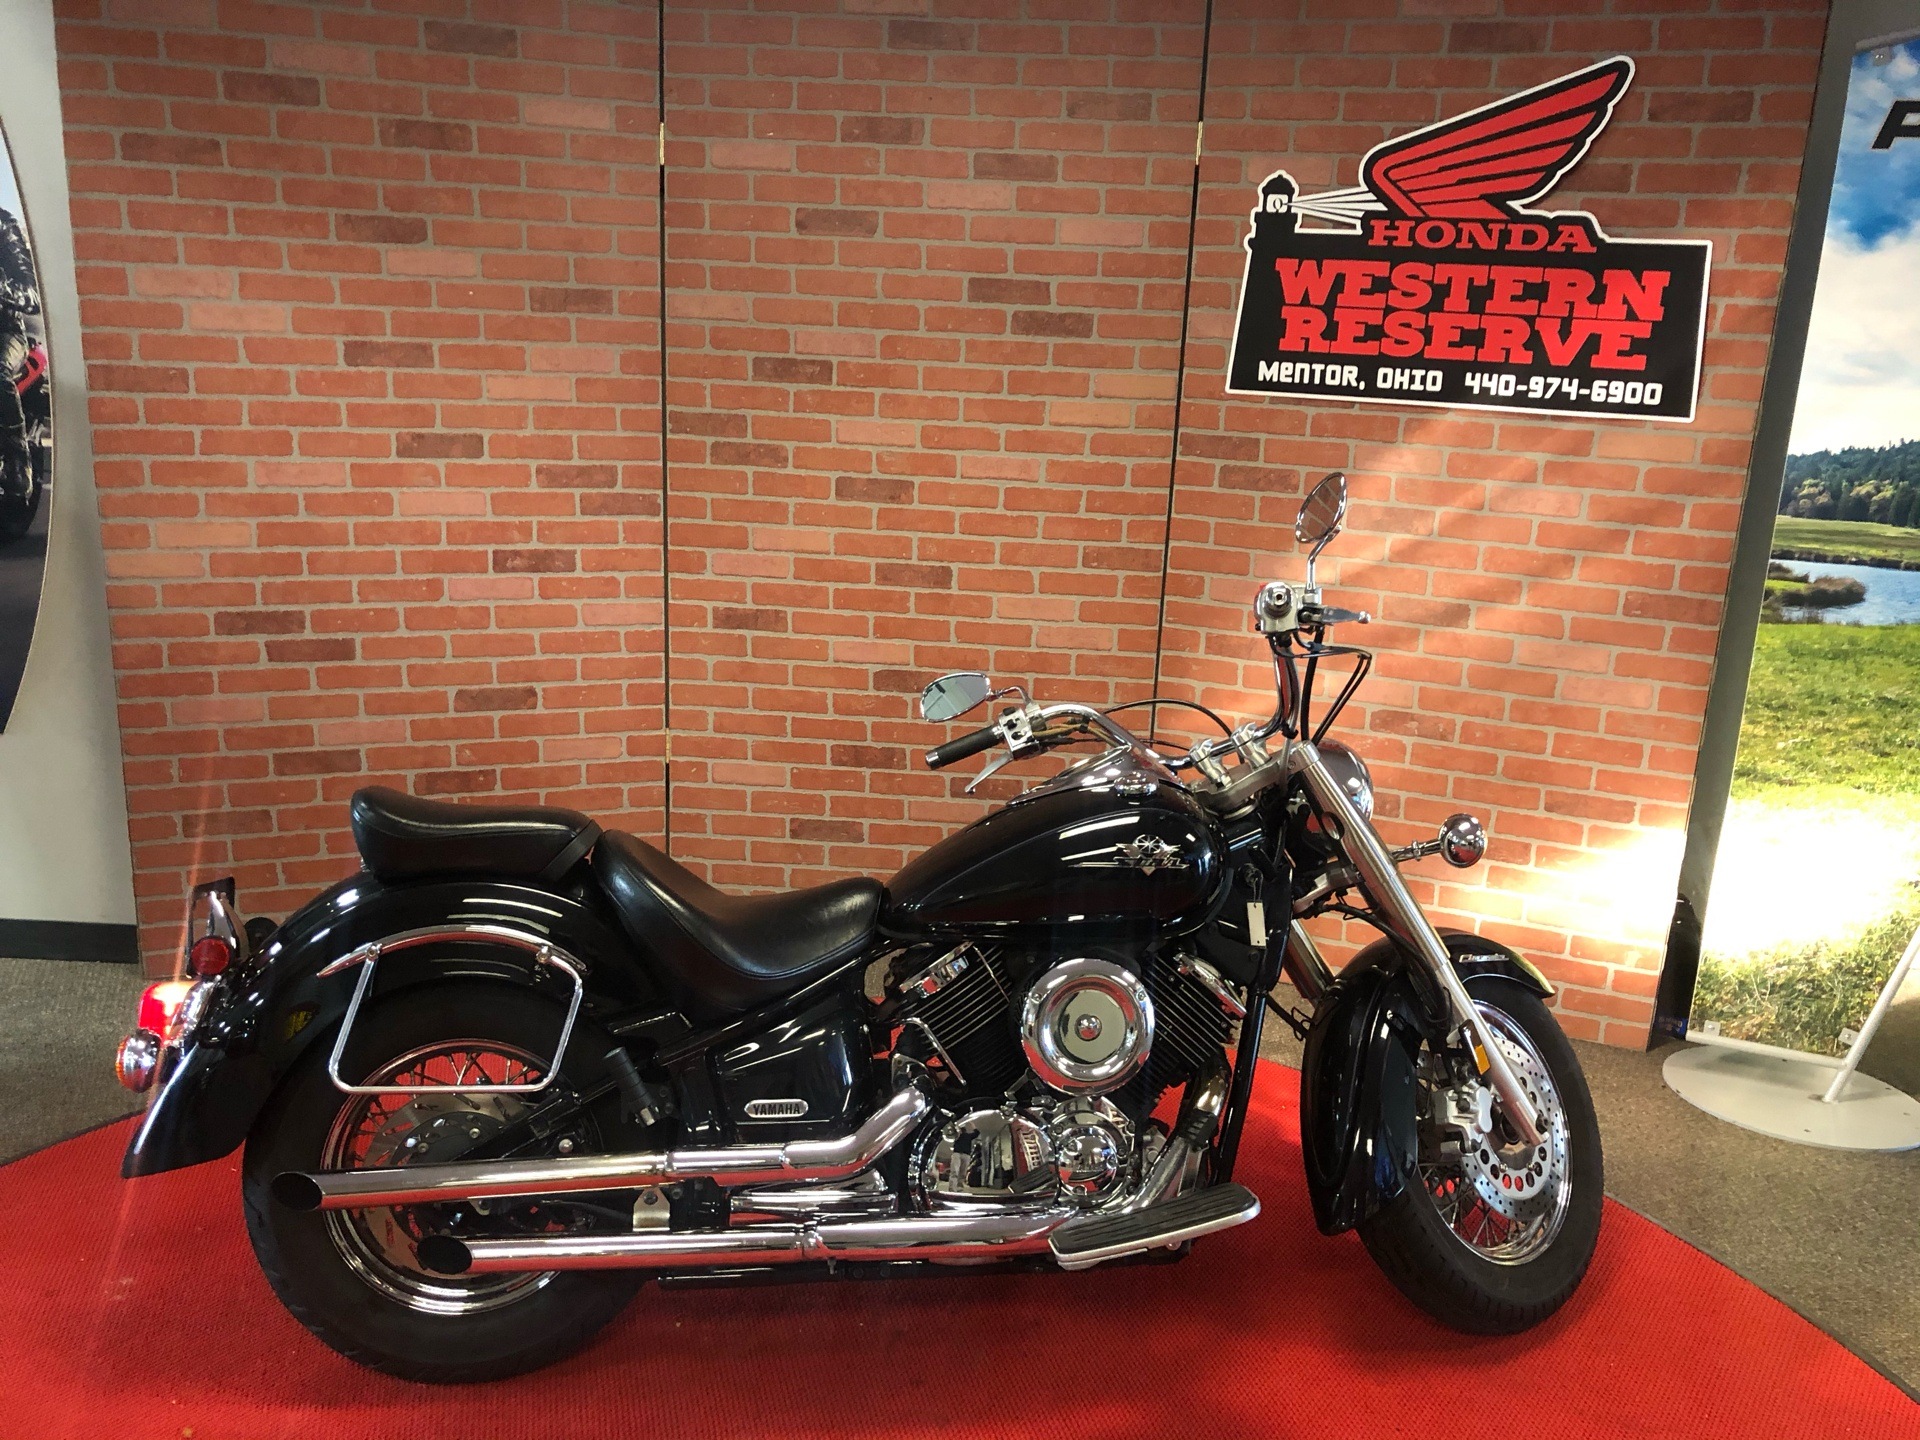 Used 2002 Yamaha V Star 1100 Classic Onyx Motorcycles In Mentor Oh N A